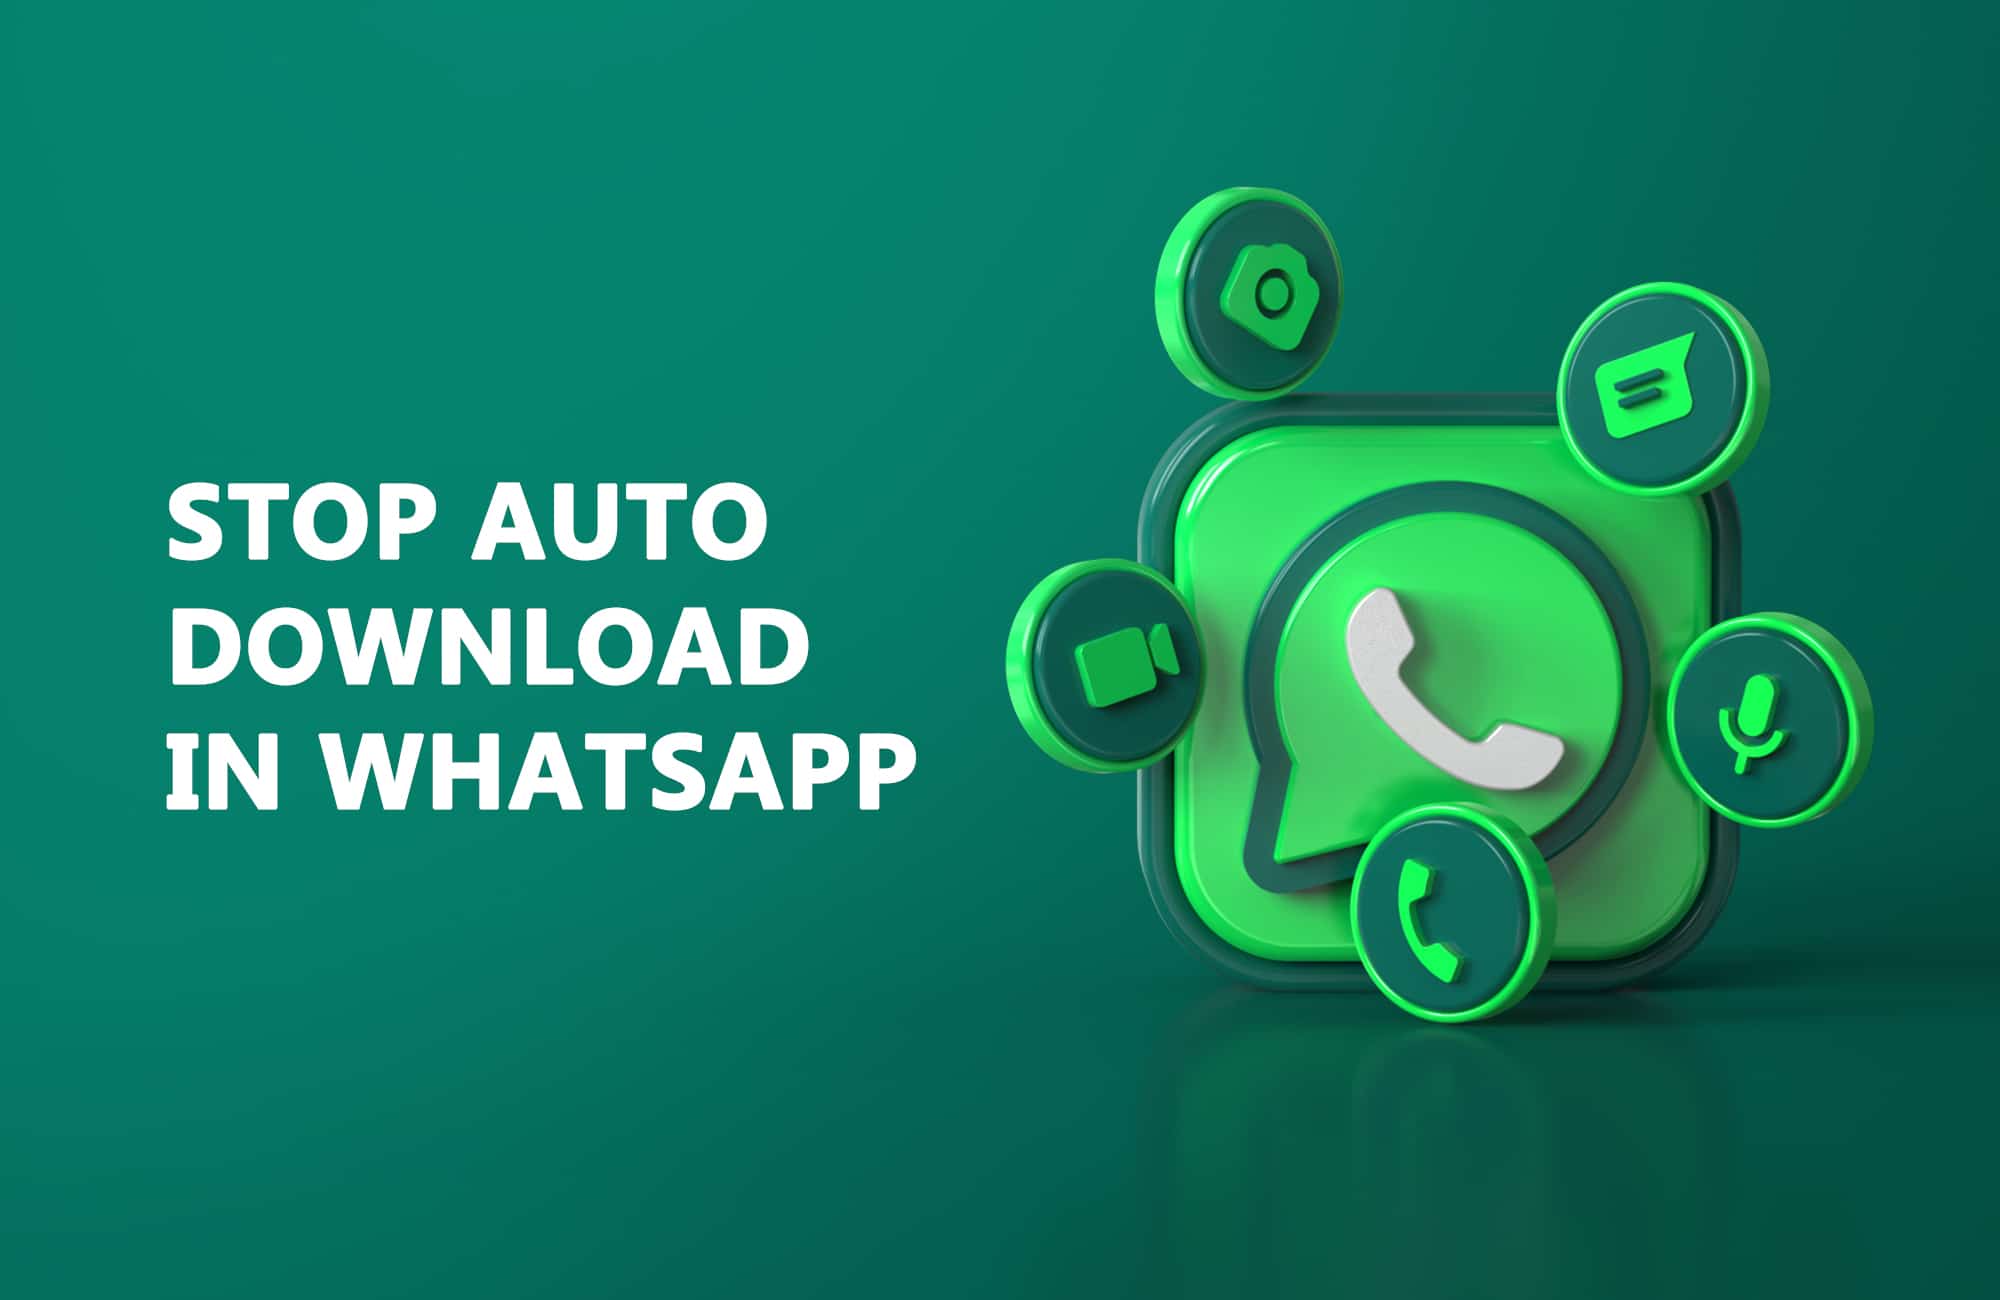 How to Stop Auto Download in WhatsApp